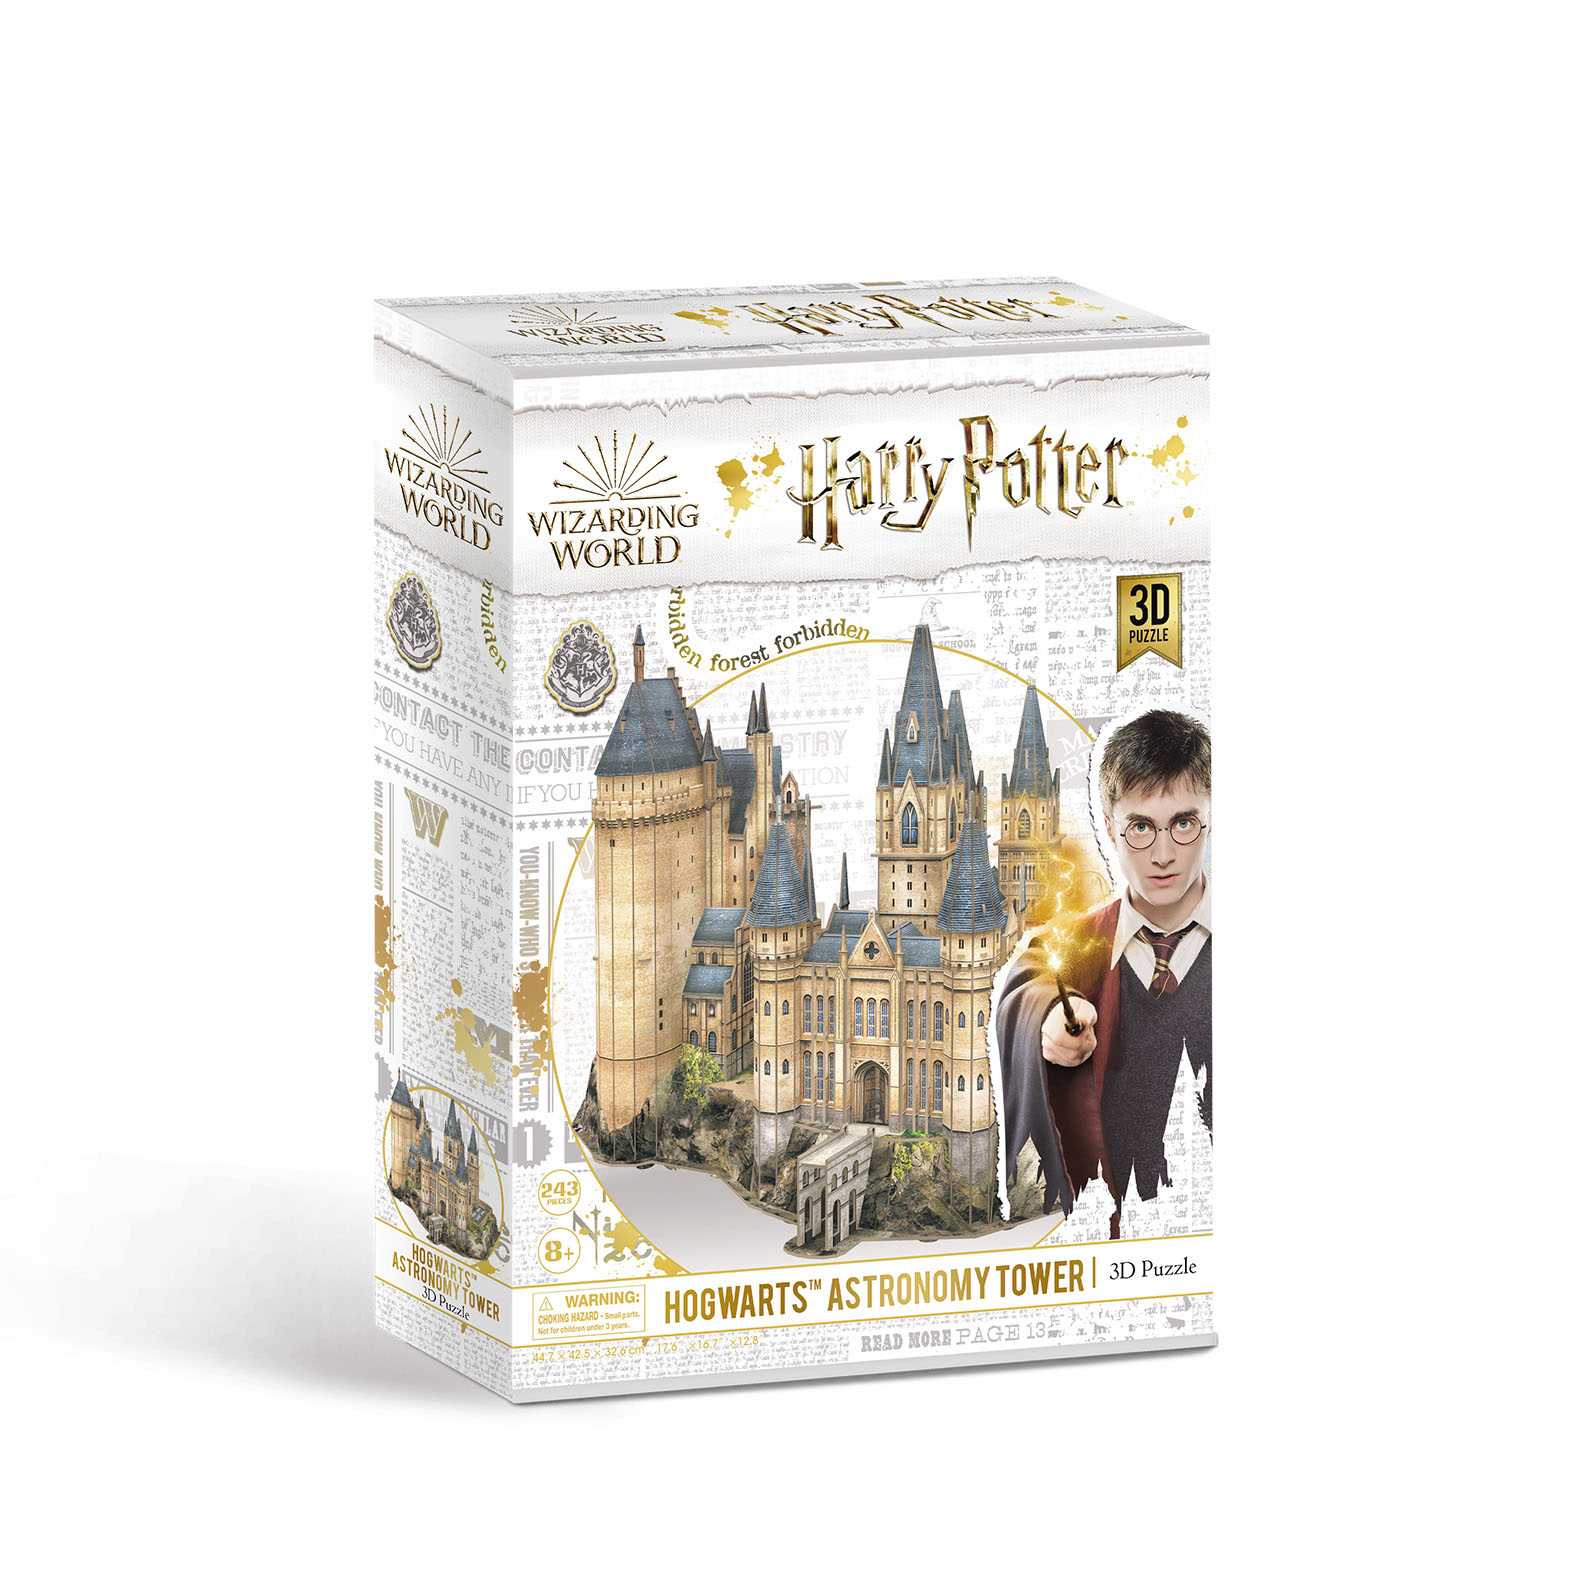 3D PuzzleRevell 00301 - Harry Potter Hogwarts Astronomy Tower